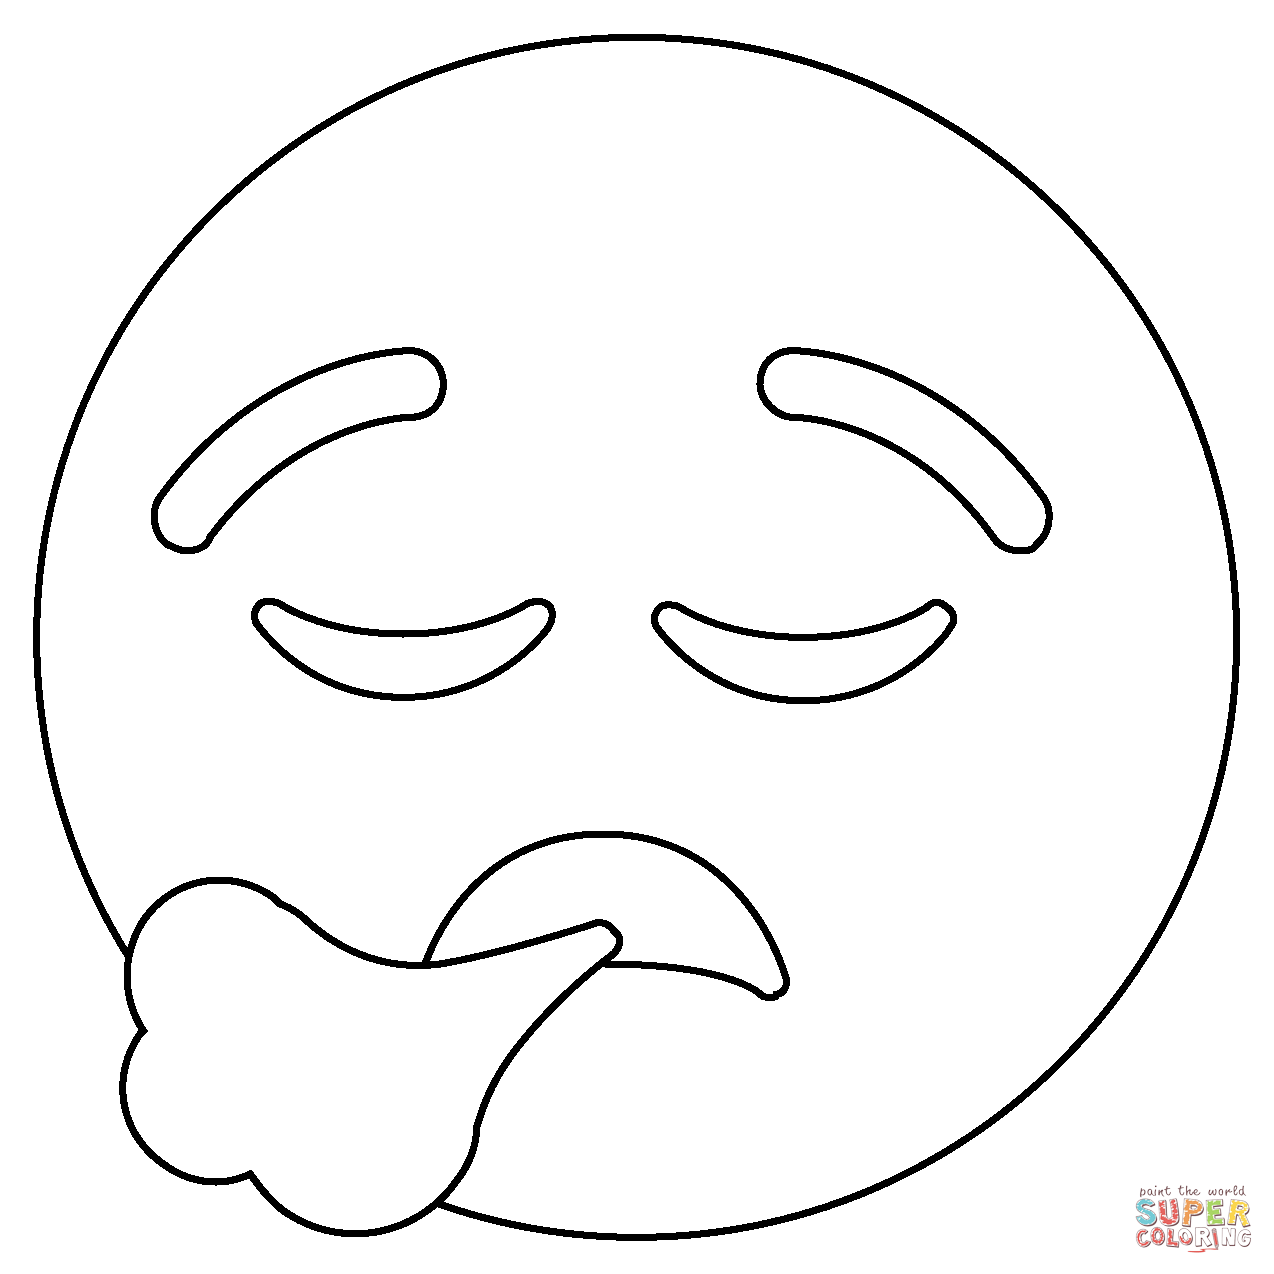 Face exhaling emoji coloring page free printable coloring pages